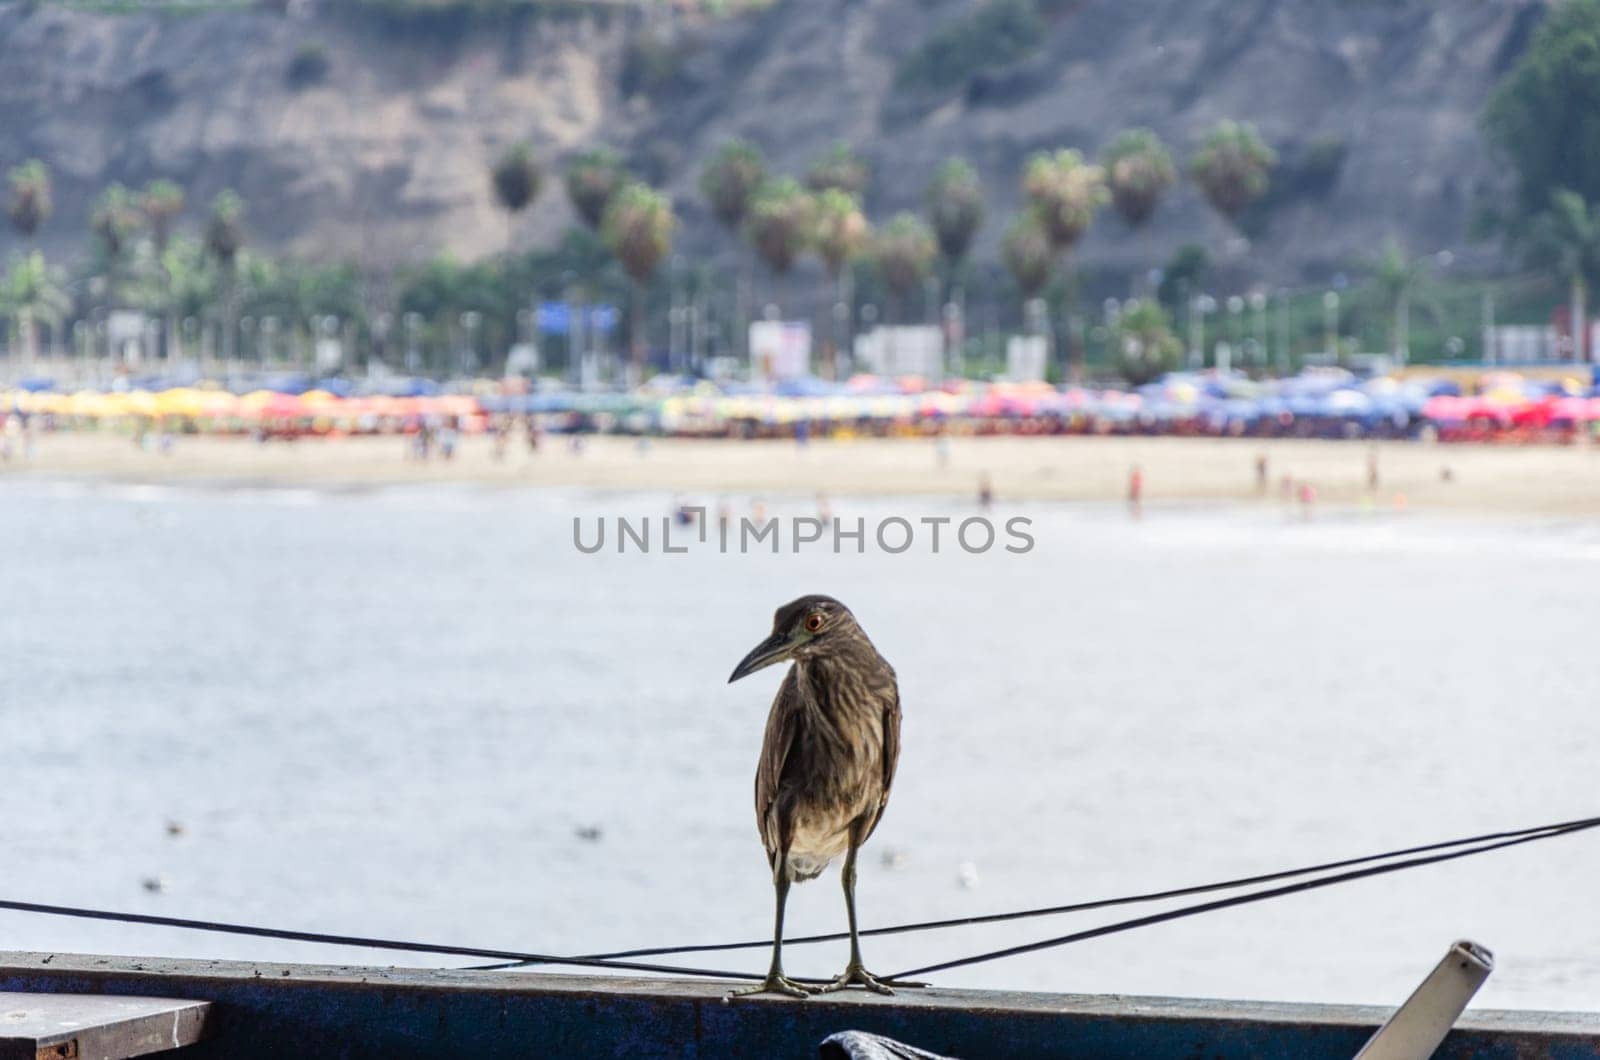 Seagull standing on a wooden beam with the background of a beach